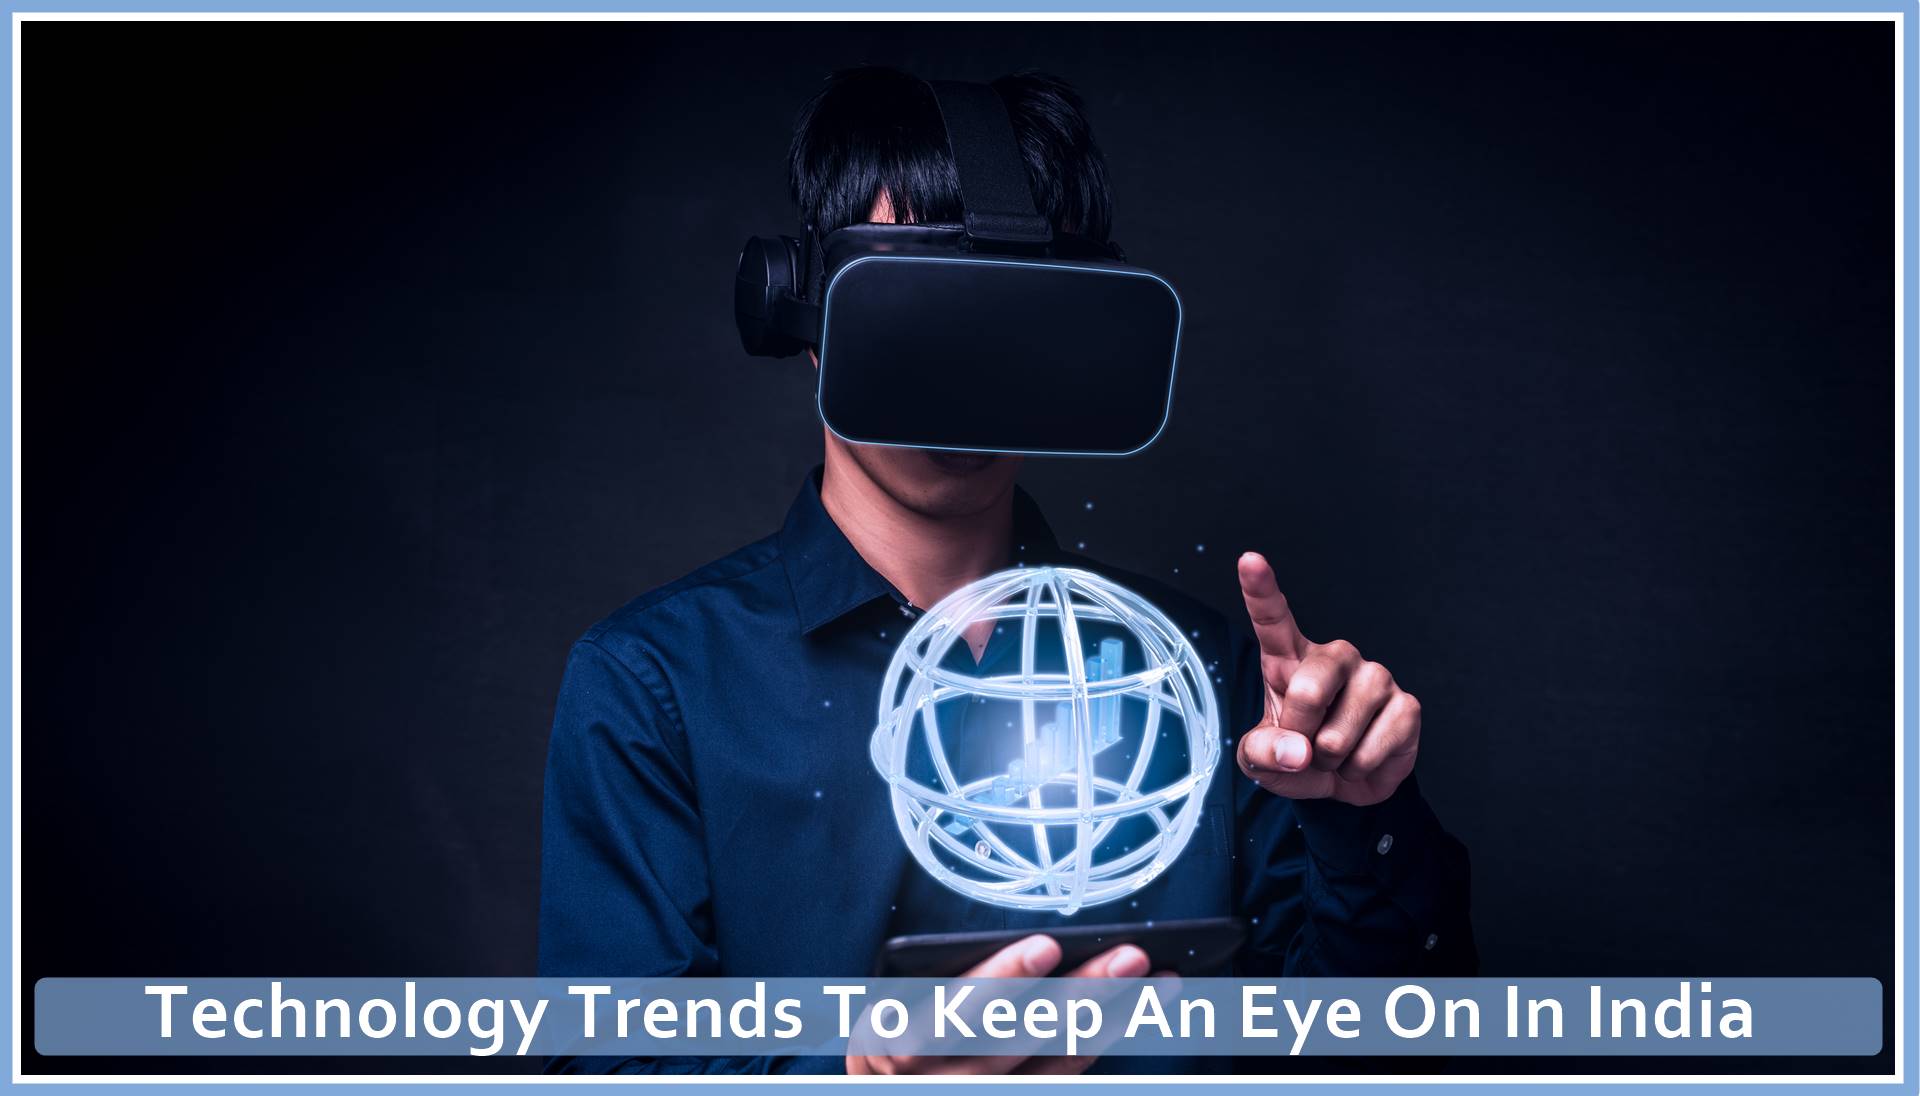 Technology Trends To Keep An Eye On In India